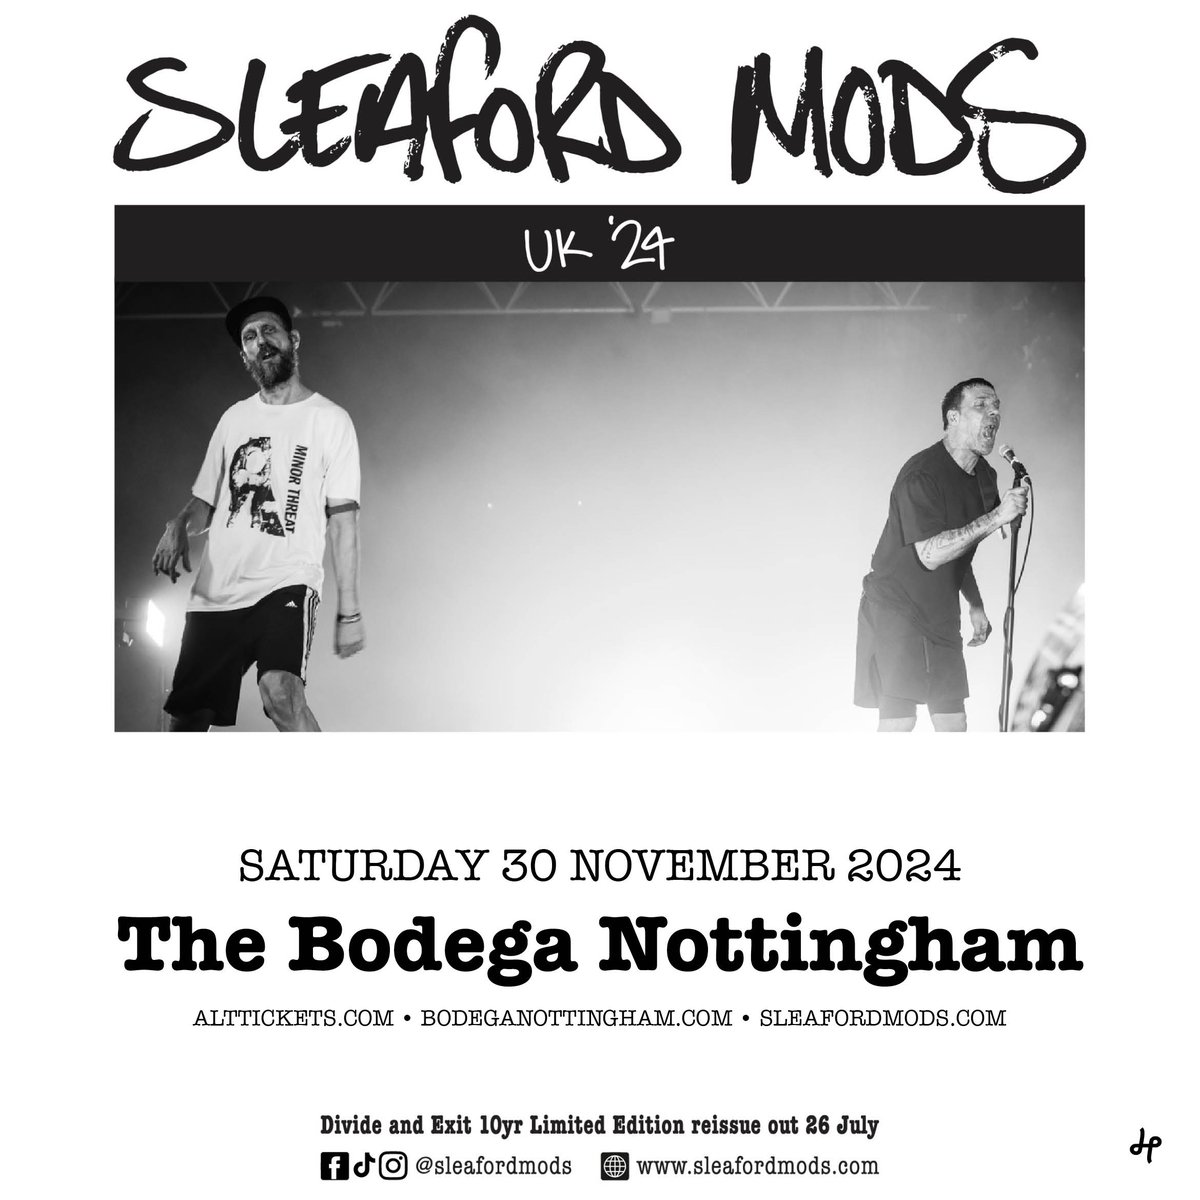 10 years on from the release of their era-capturing, breakthrough album 'Divide and Exit', @sleafordmods play a show at @bodeganotts, on Saturday 30th November, as part of the venue's 25-year celebrations! Tickets go on sale this Friday, set a reminder: tinyurl.com/56xbwtmn